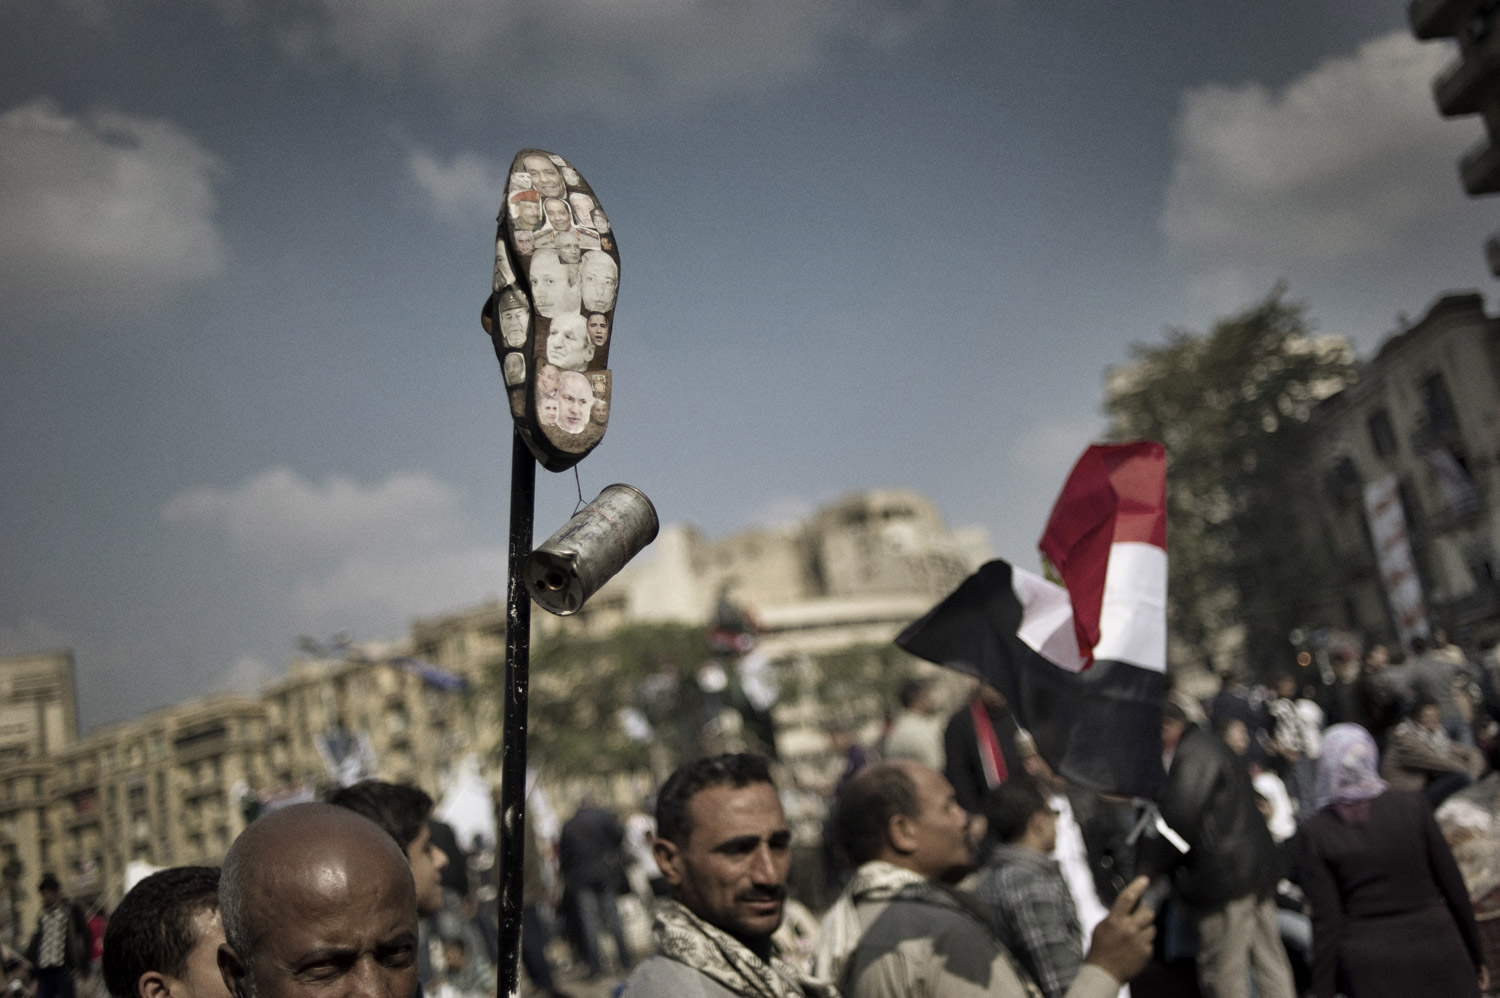 Photographs of politicians are plastered on the sole of a shoe during continued protests in Tahrir Square, November 25, 2011.